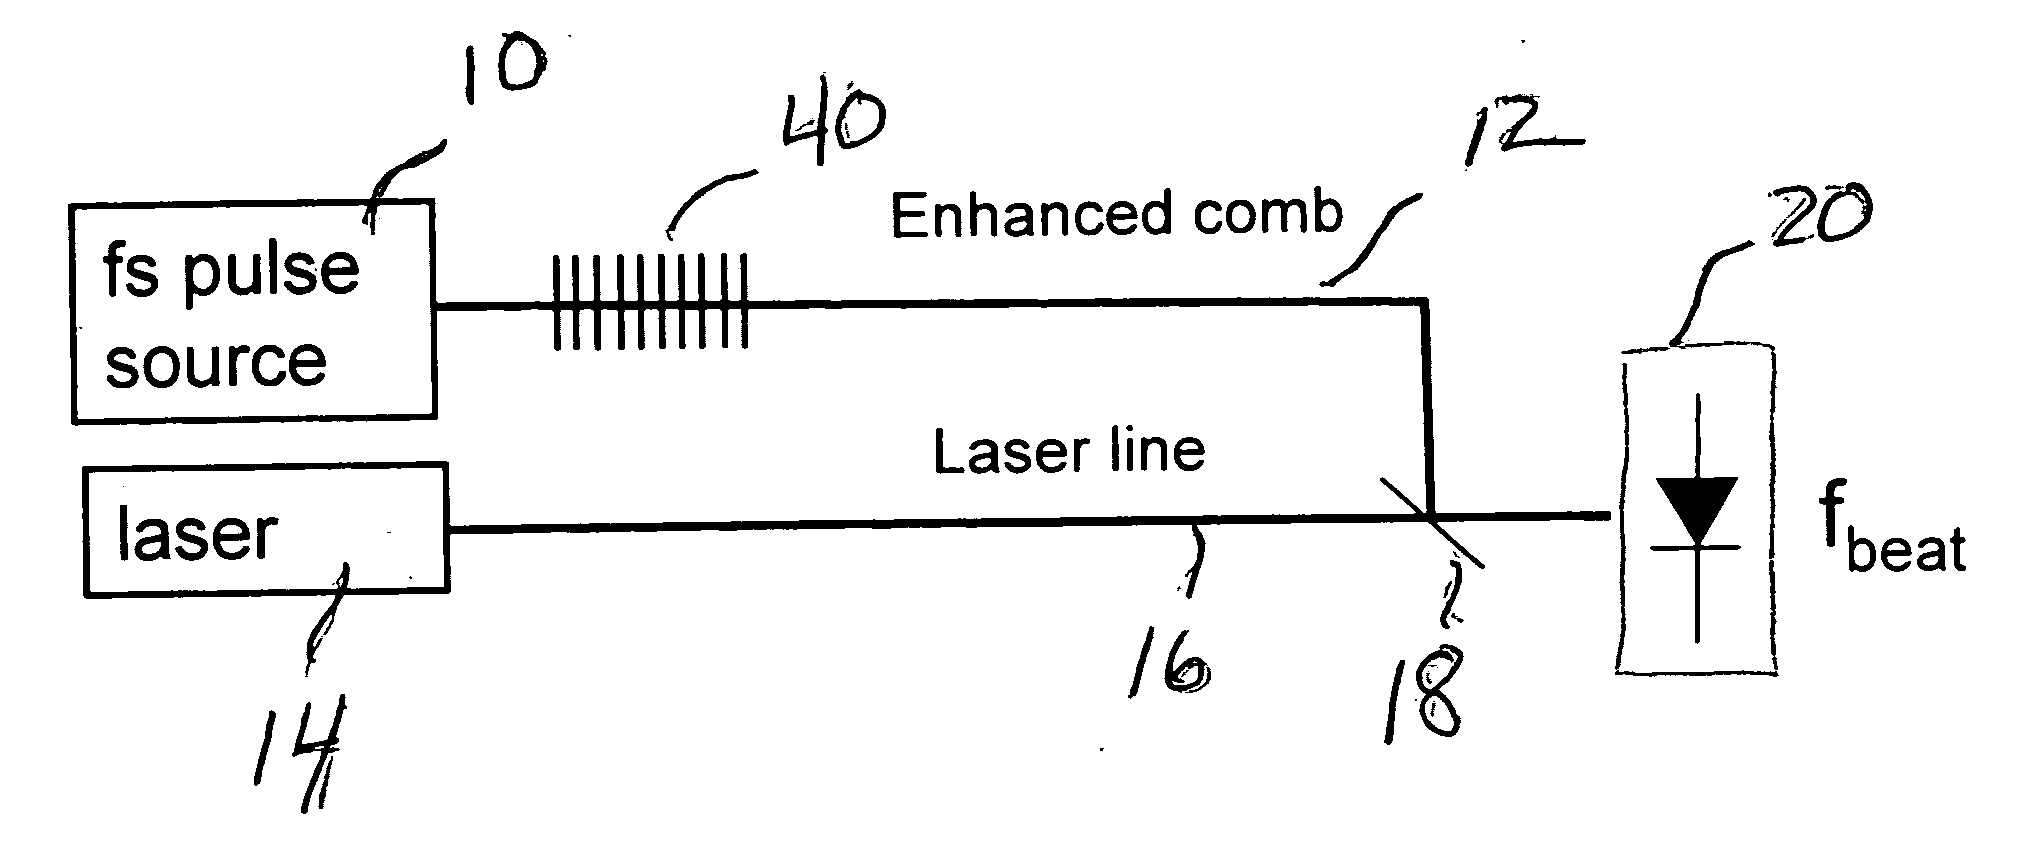 Stabilized optical fiber continuum frequency combs using post-processed highly nonlinear fibers